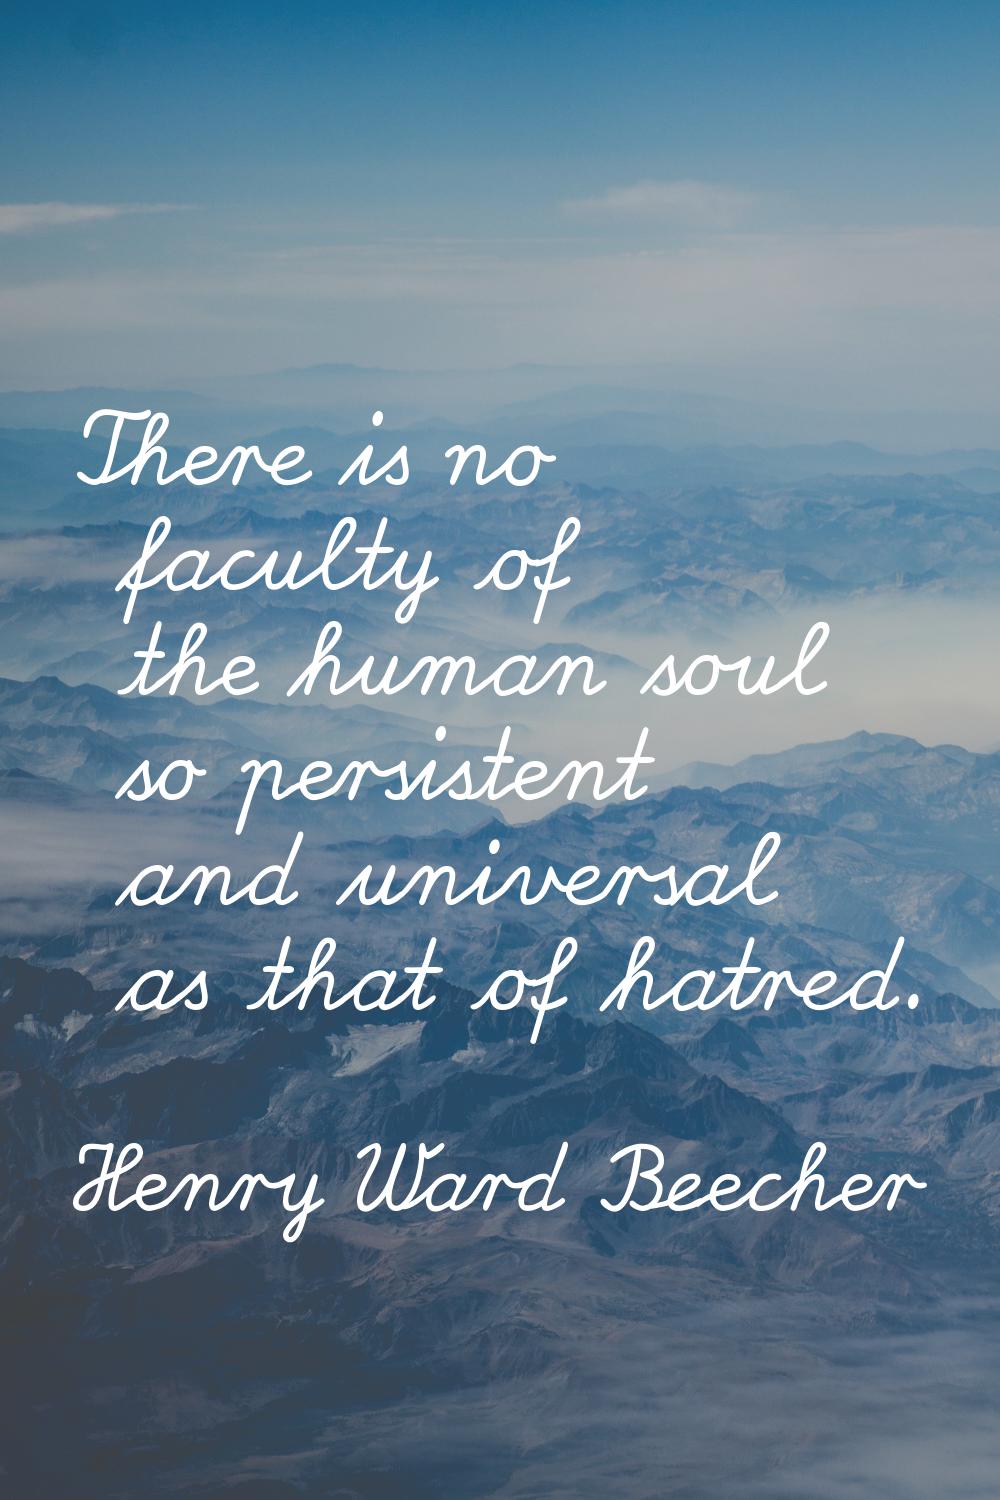 There is no faculty of the human soul so persistent and universal as that of hatred.